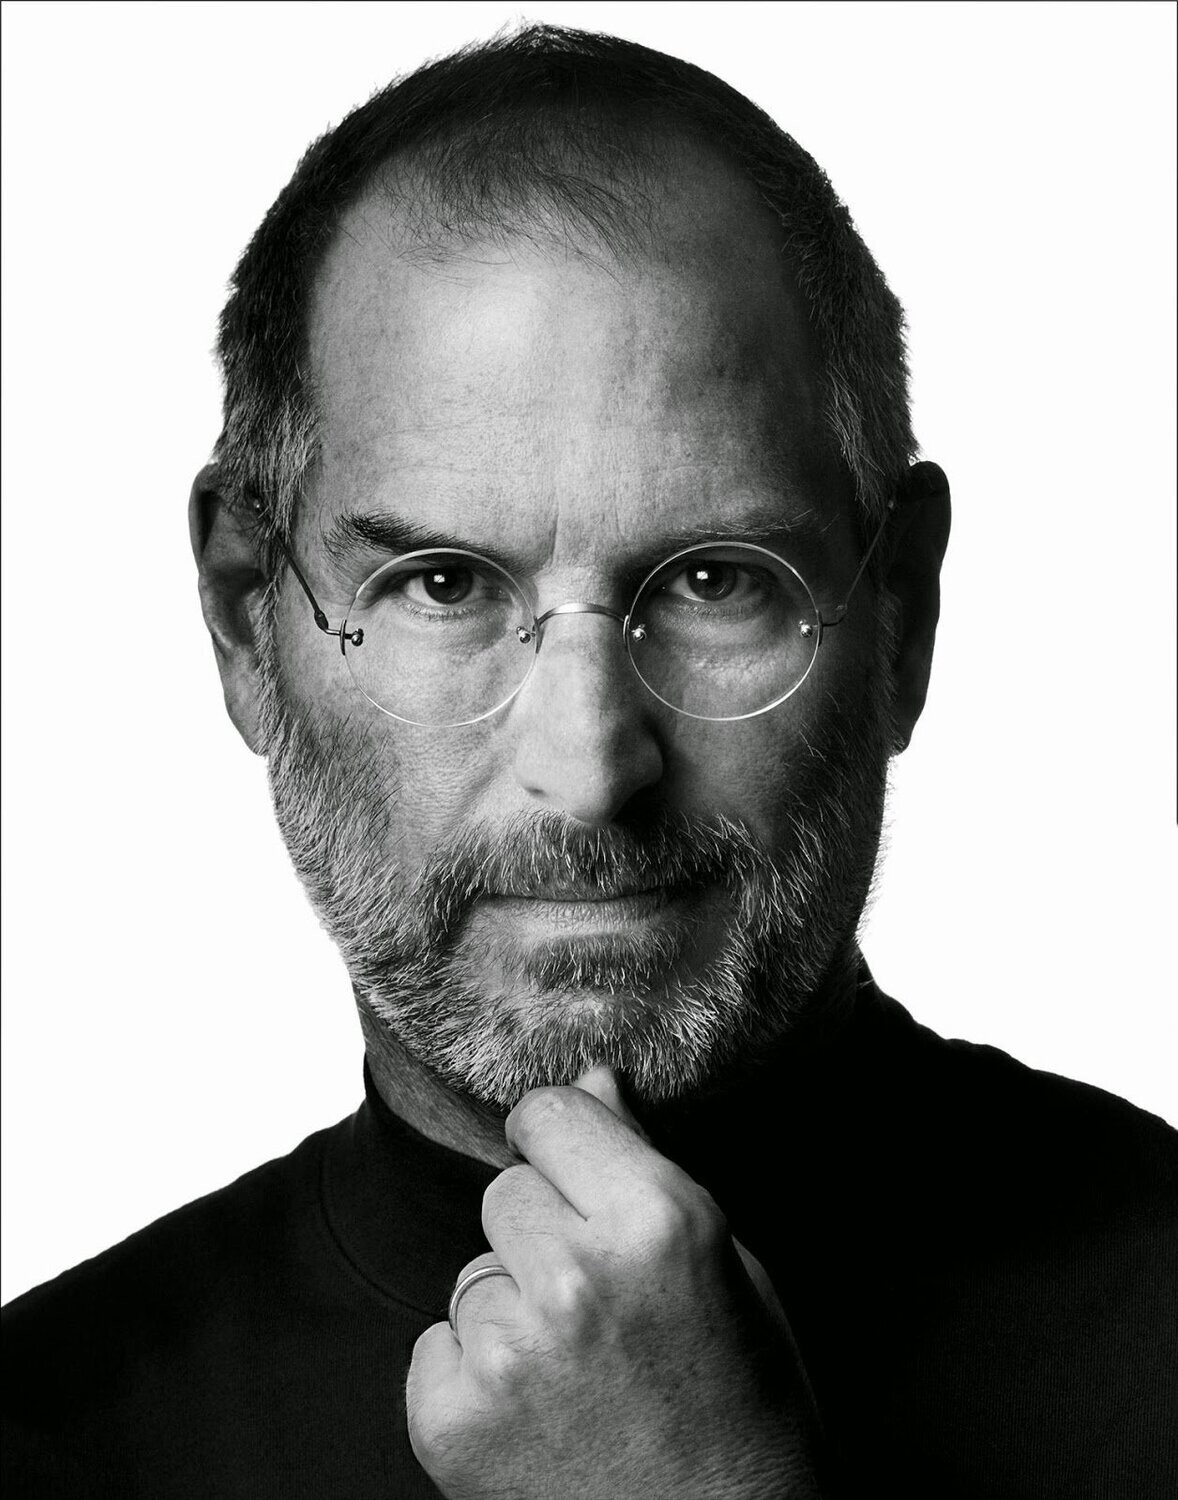 How to Live Before You Die by Steve Jobs